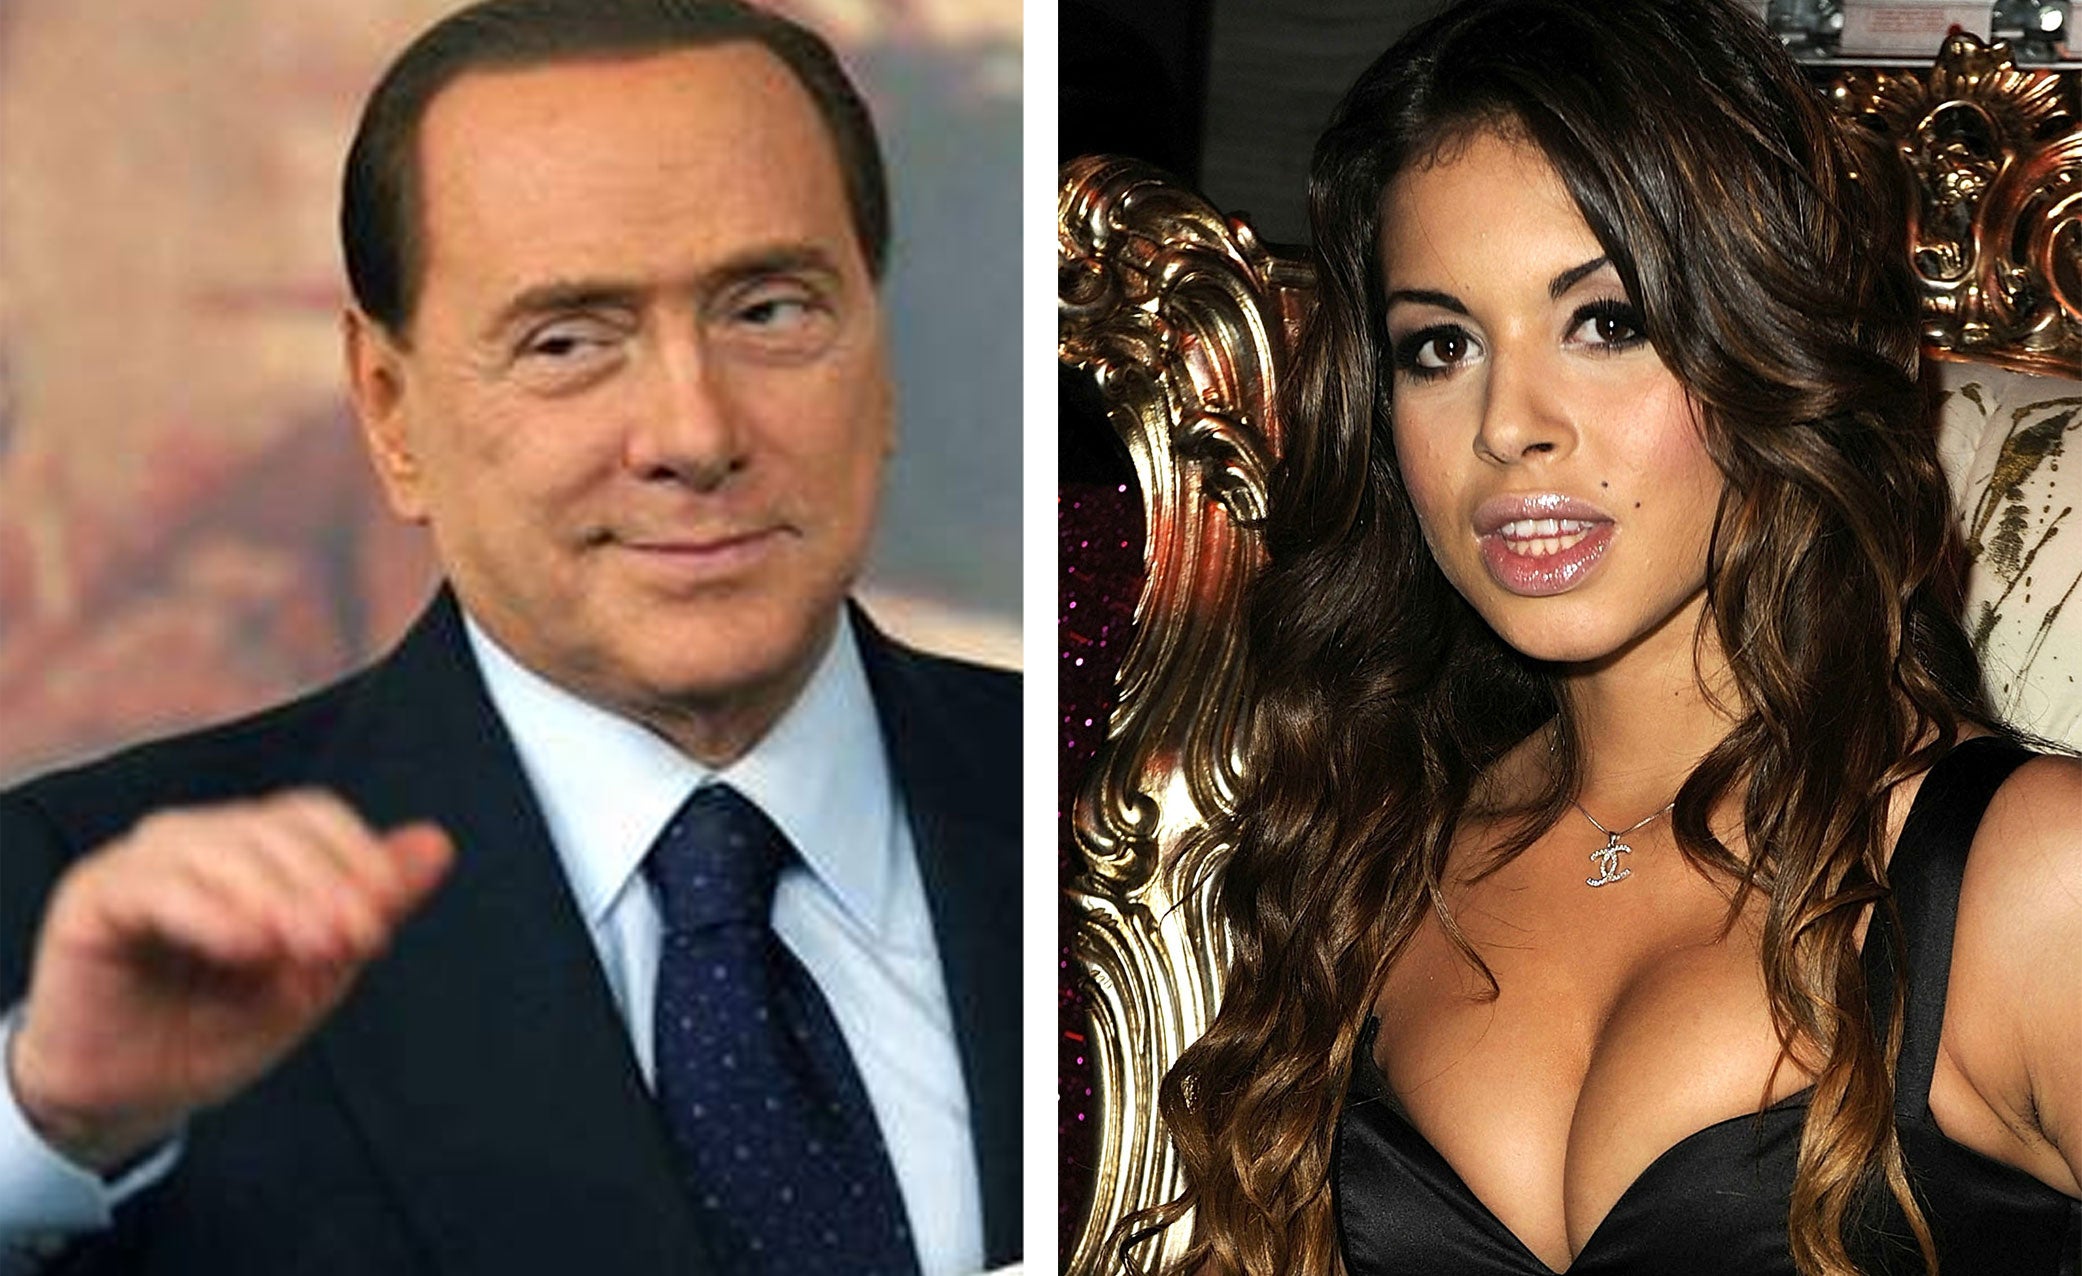 Silvio Berlusconi and Karima El-Mahroug, who has become better known as Ruby the Heartstealer